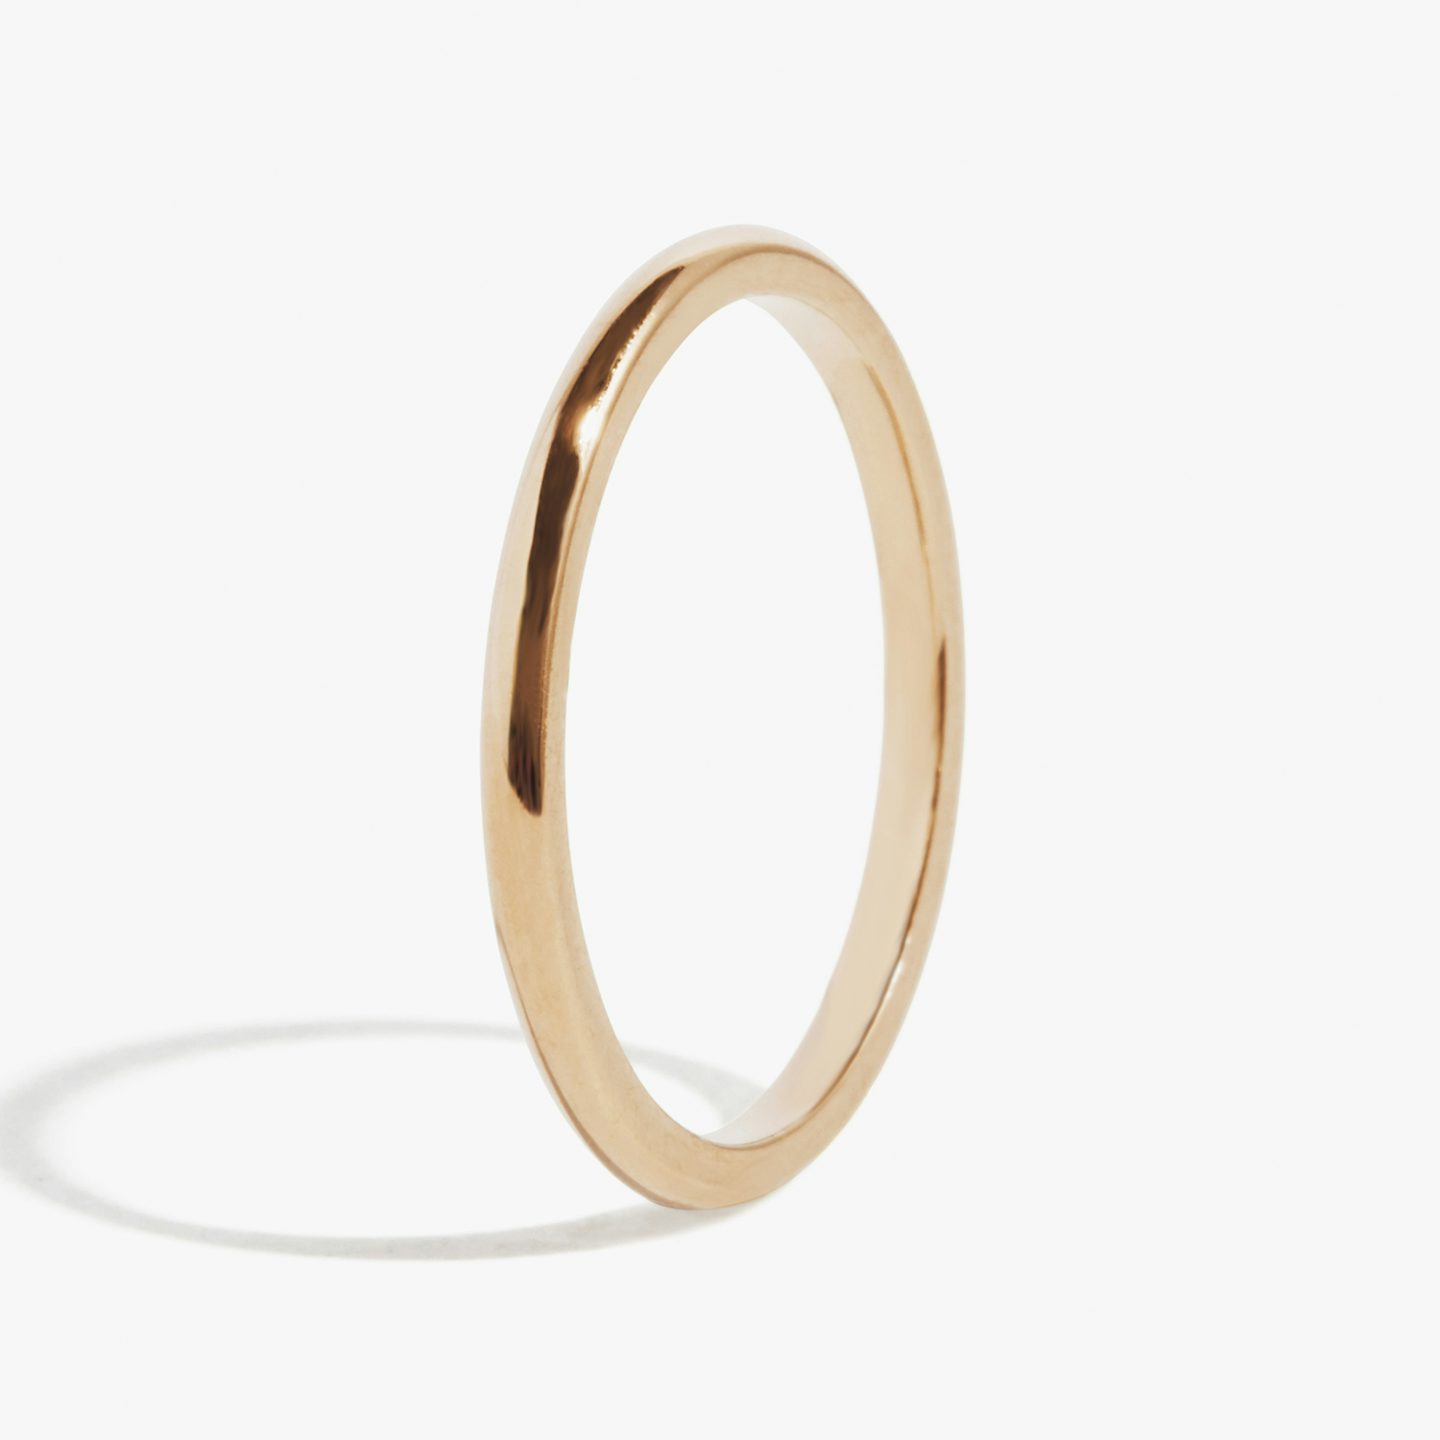 The Round | 14k | 14k Rose Gold | Band width: Small - 1.5mm